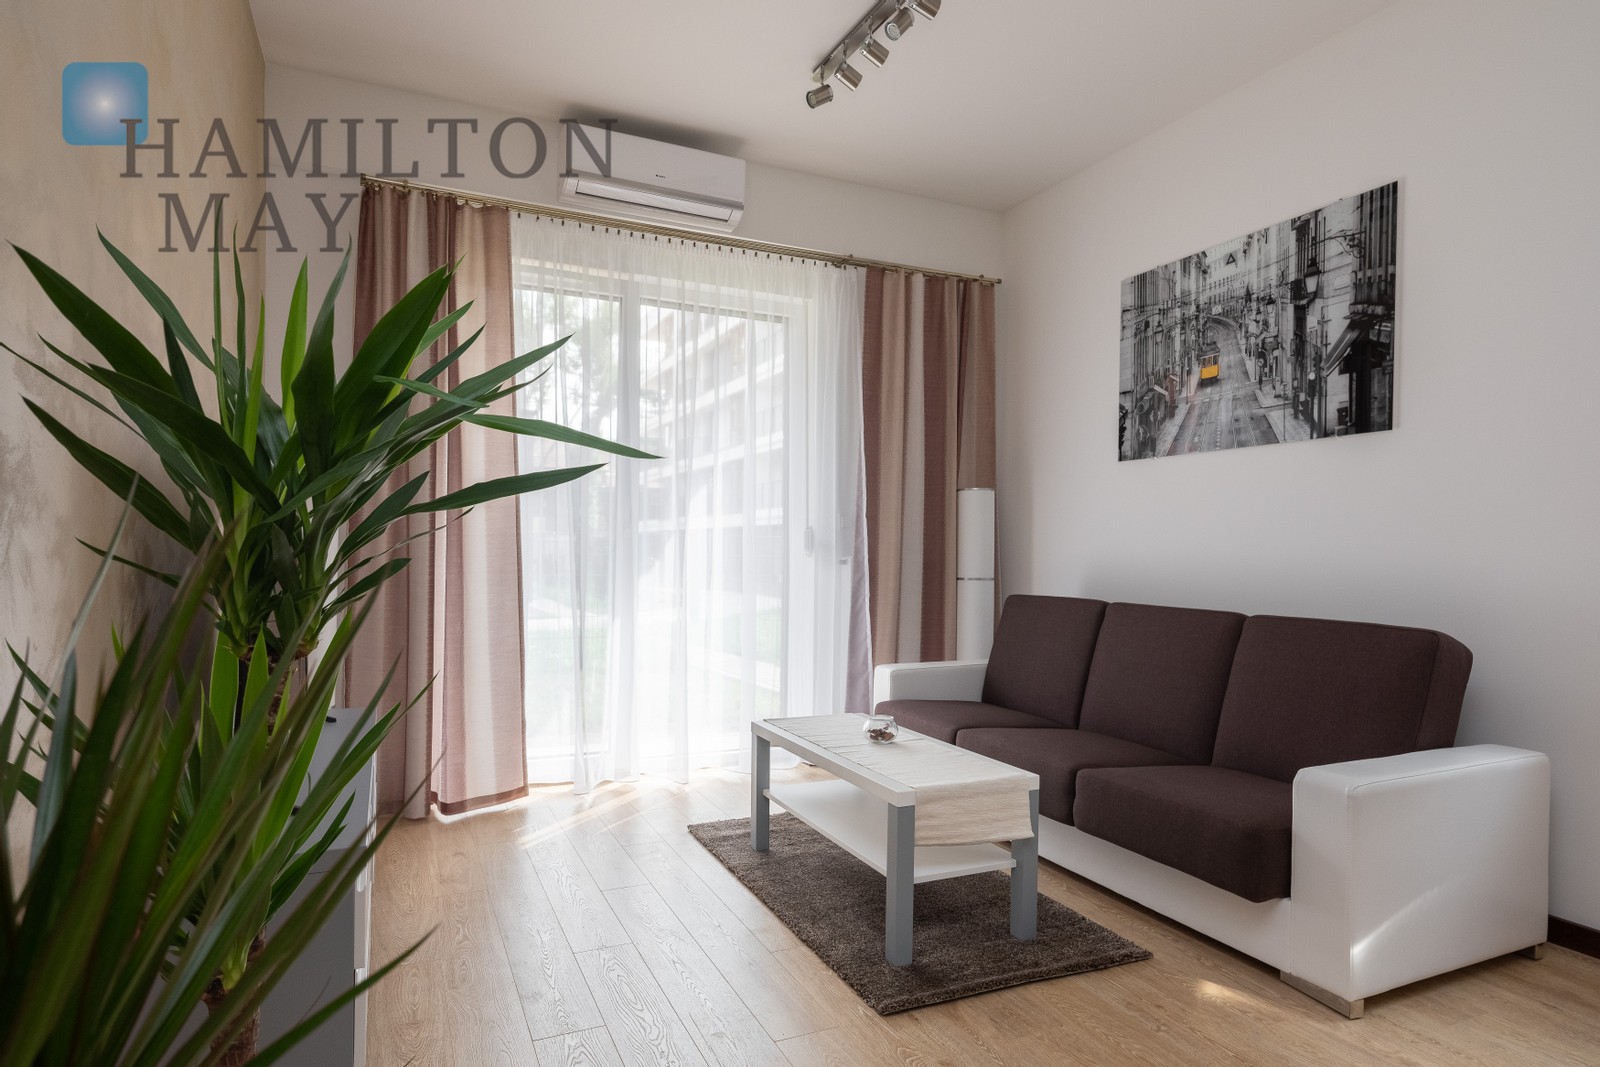 A two-room apartment with a garden in the prestigious Rakowicka Podkowa investment Krakow for sale